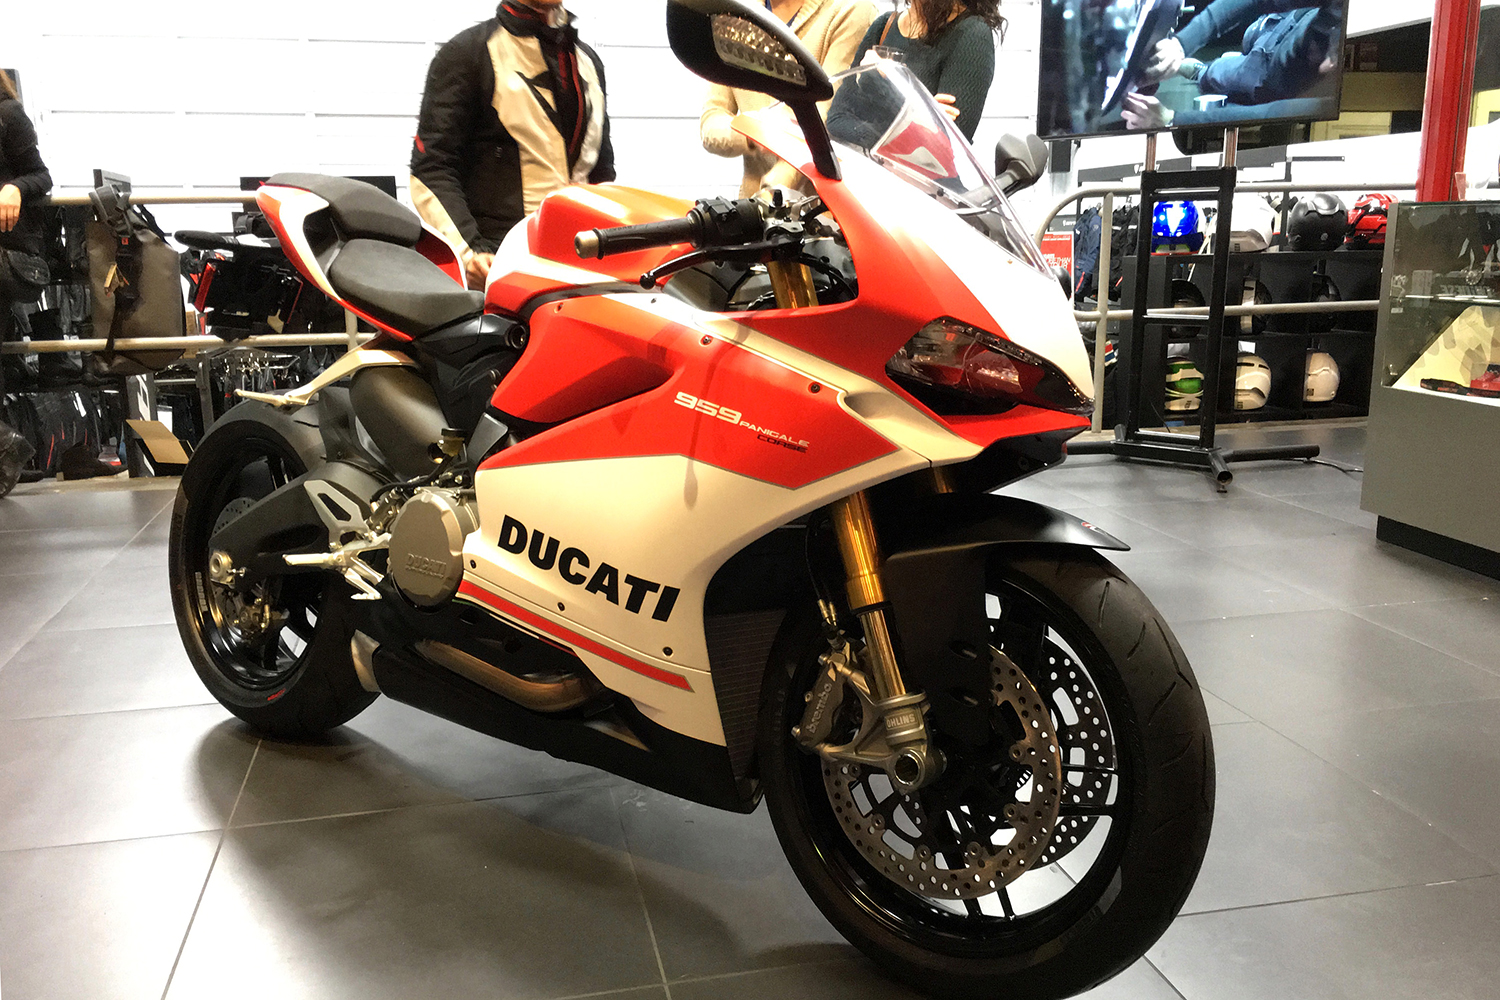 ducati 2018 motorcycle preview panigale 959 corse full1